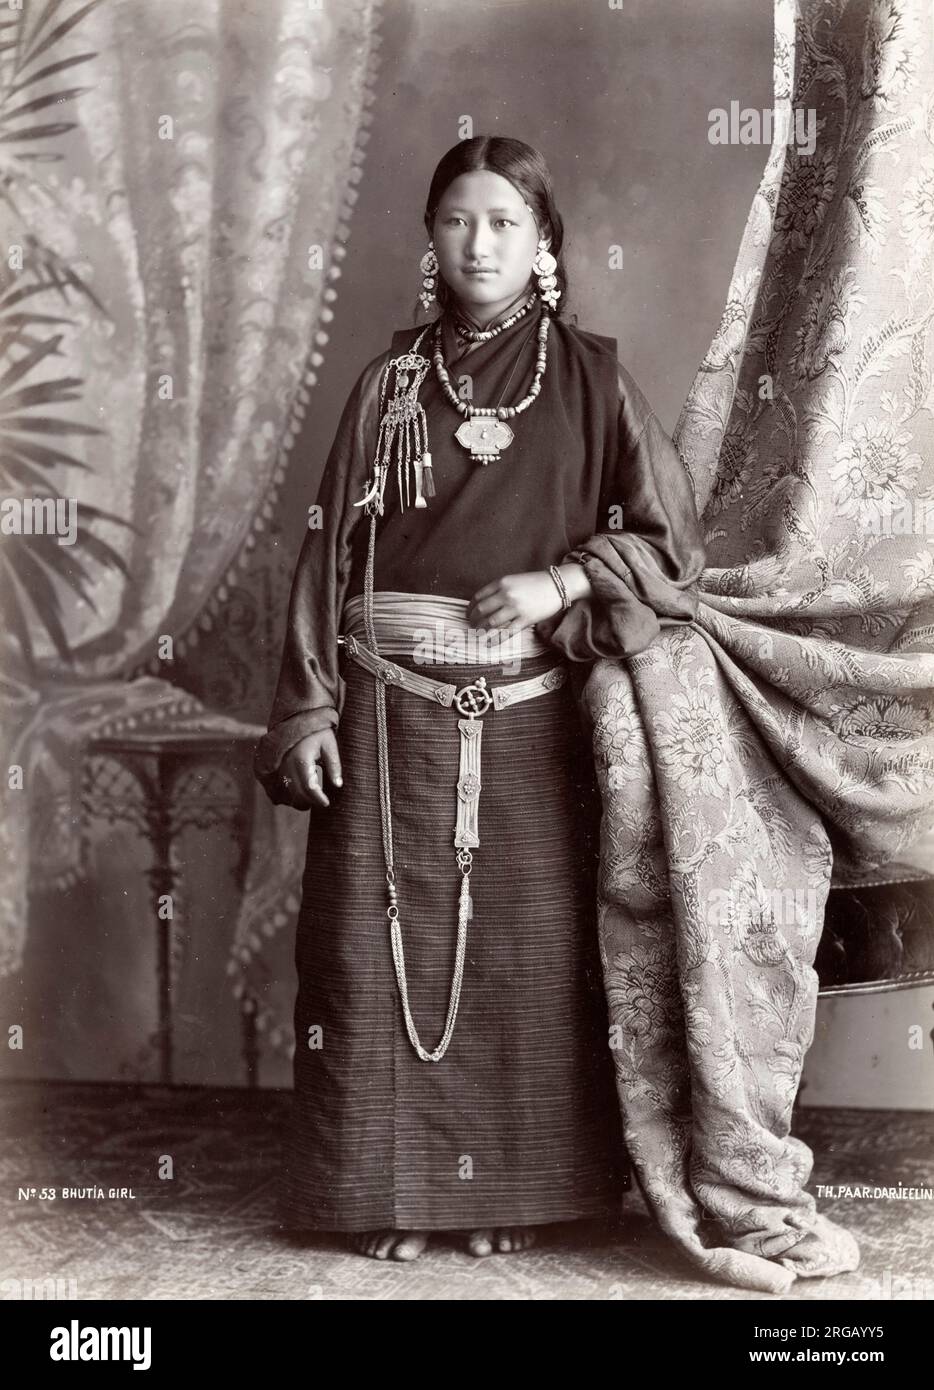 Vintage 19th century photograph - Bhutia girl. The Bhutia constitute a majority of the population of Bhutan, where they live mainly in the western and central regions of the country, and form minorities in Nepal and India, particularly in the Indian state of Sikkim; the likely location for this image. Stock Photo